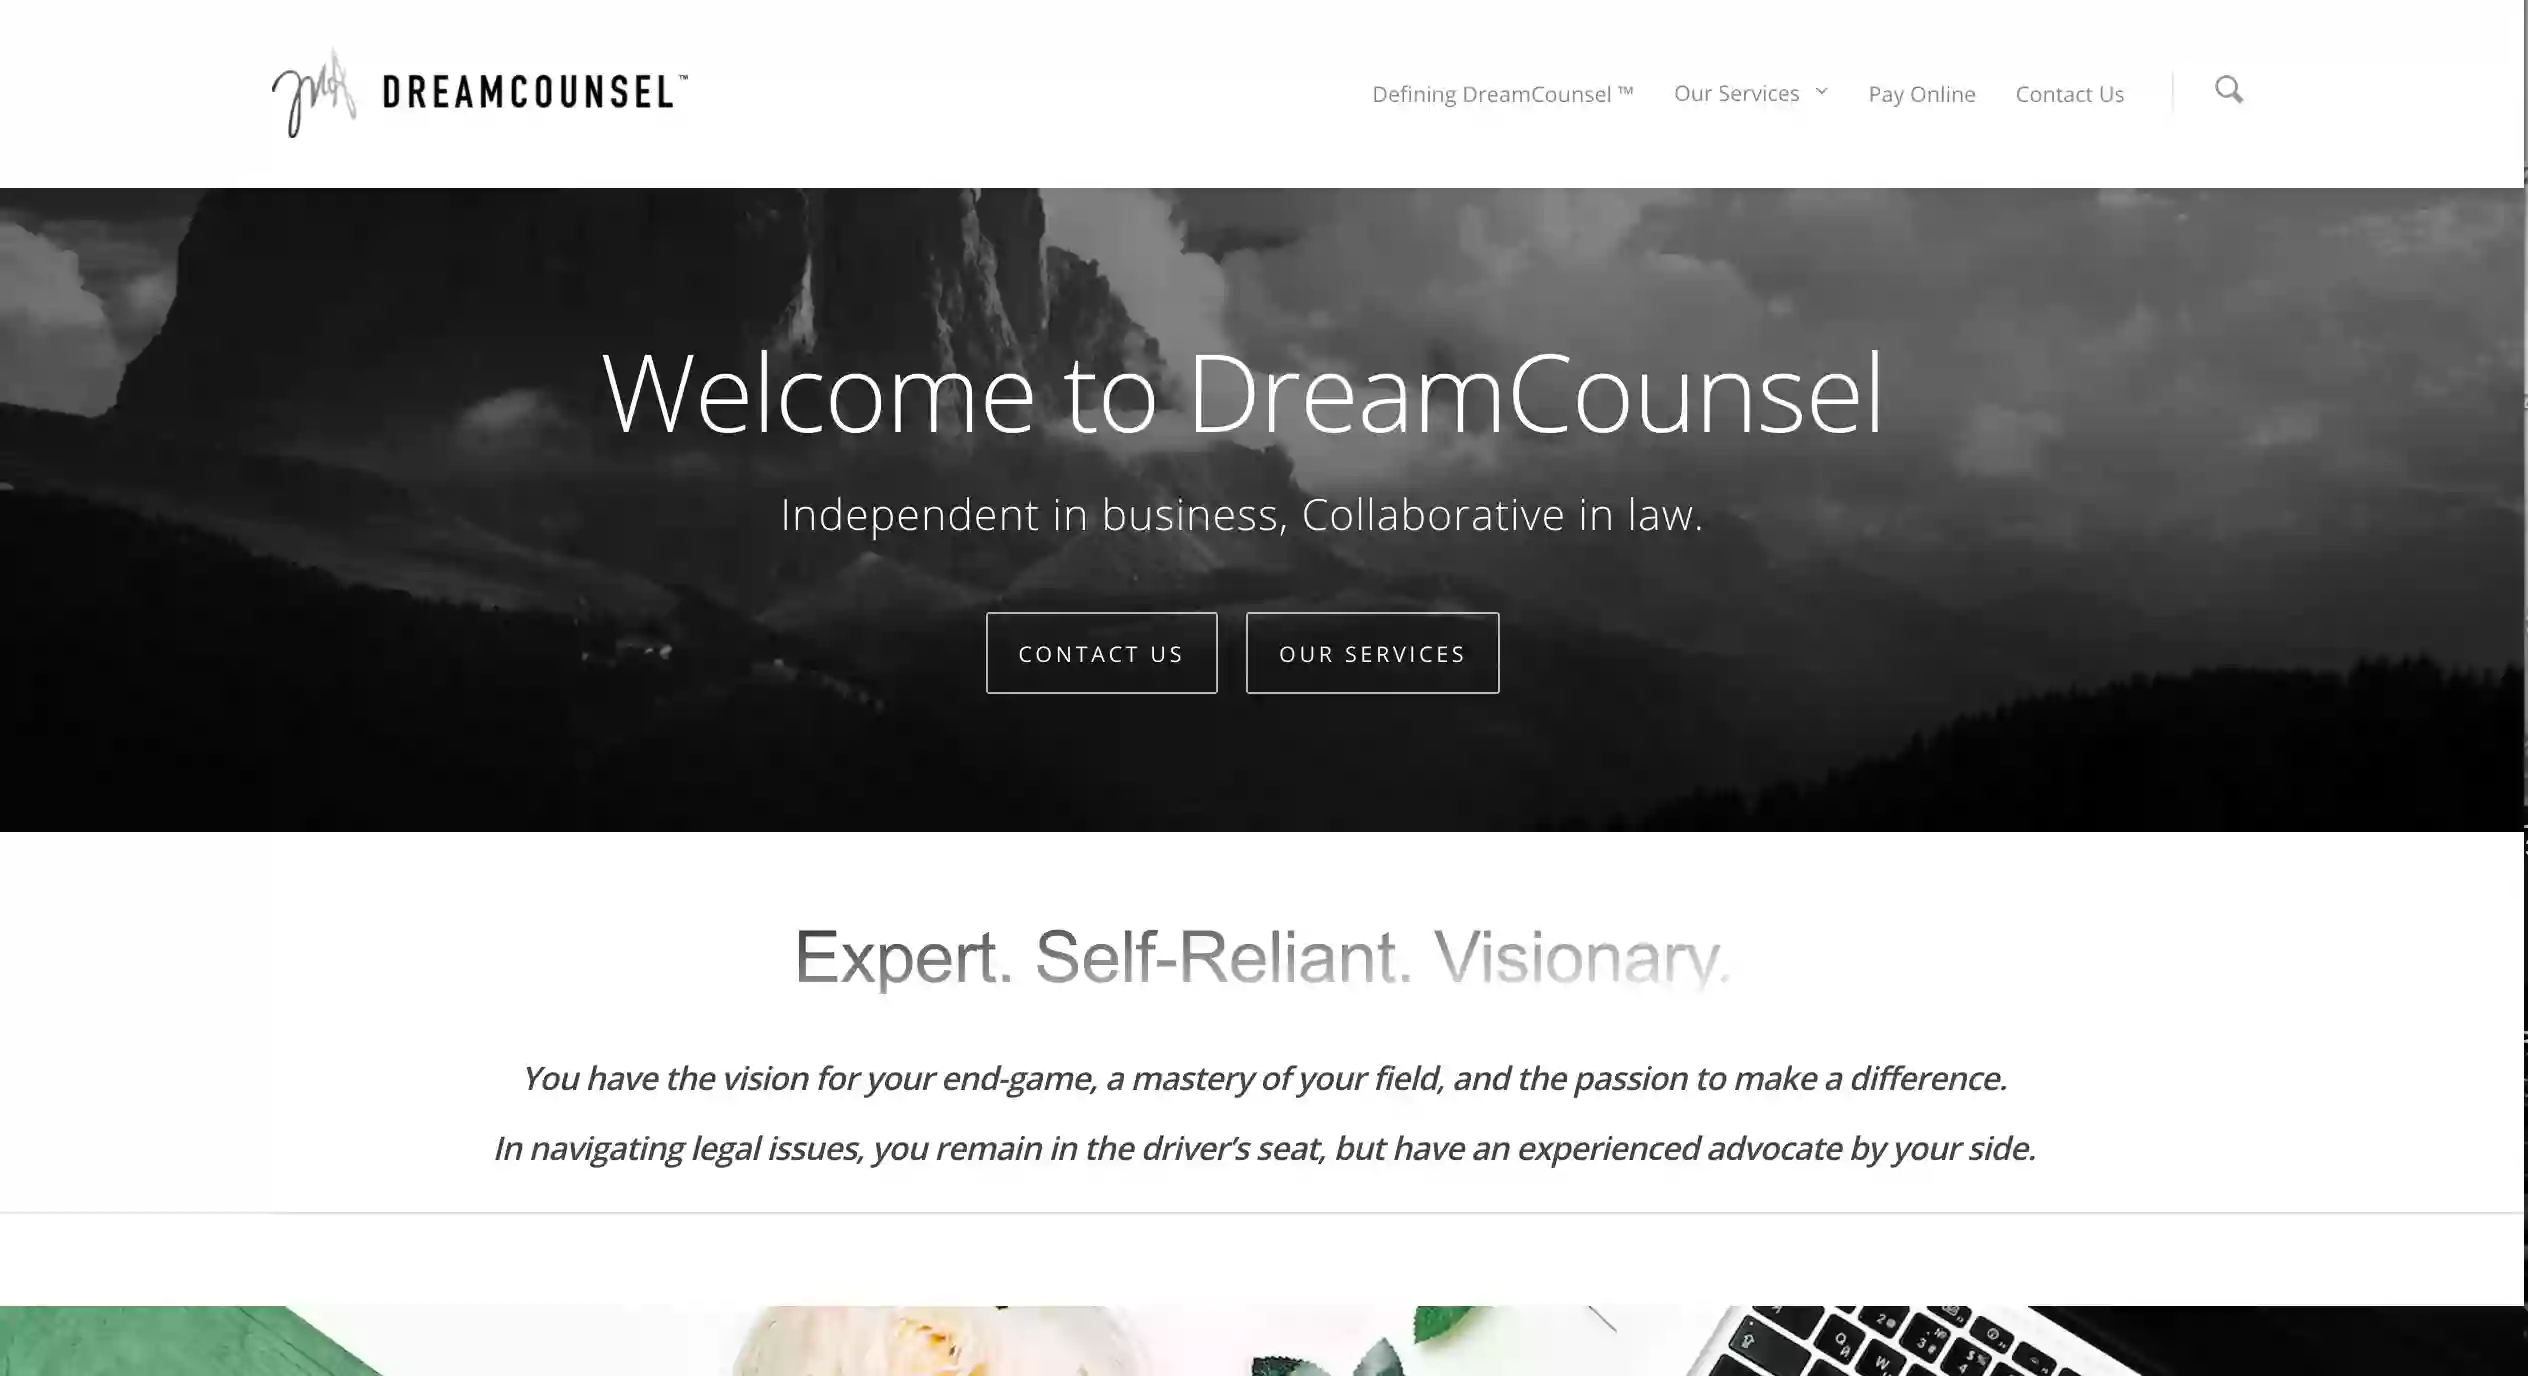 DREAMCOUNSEL